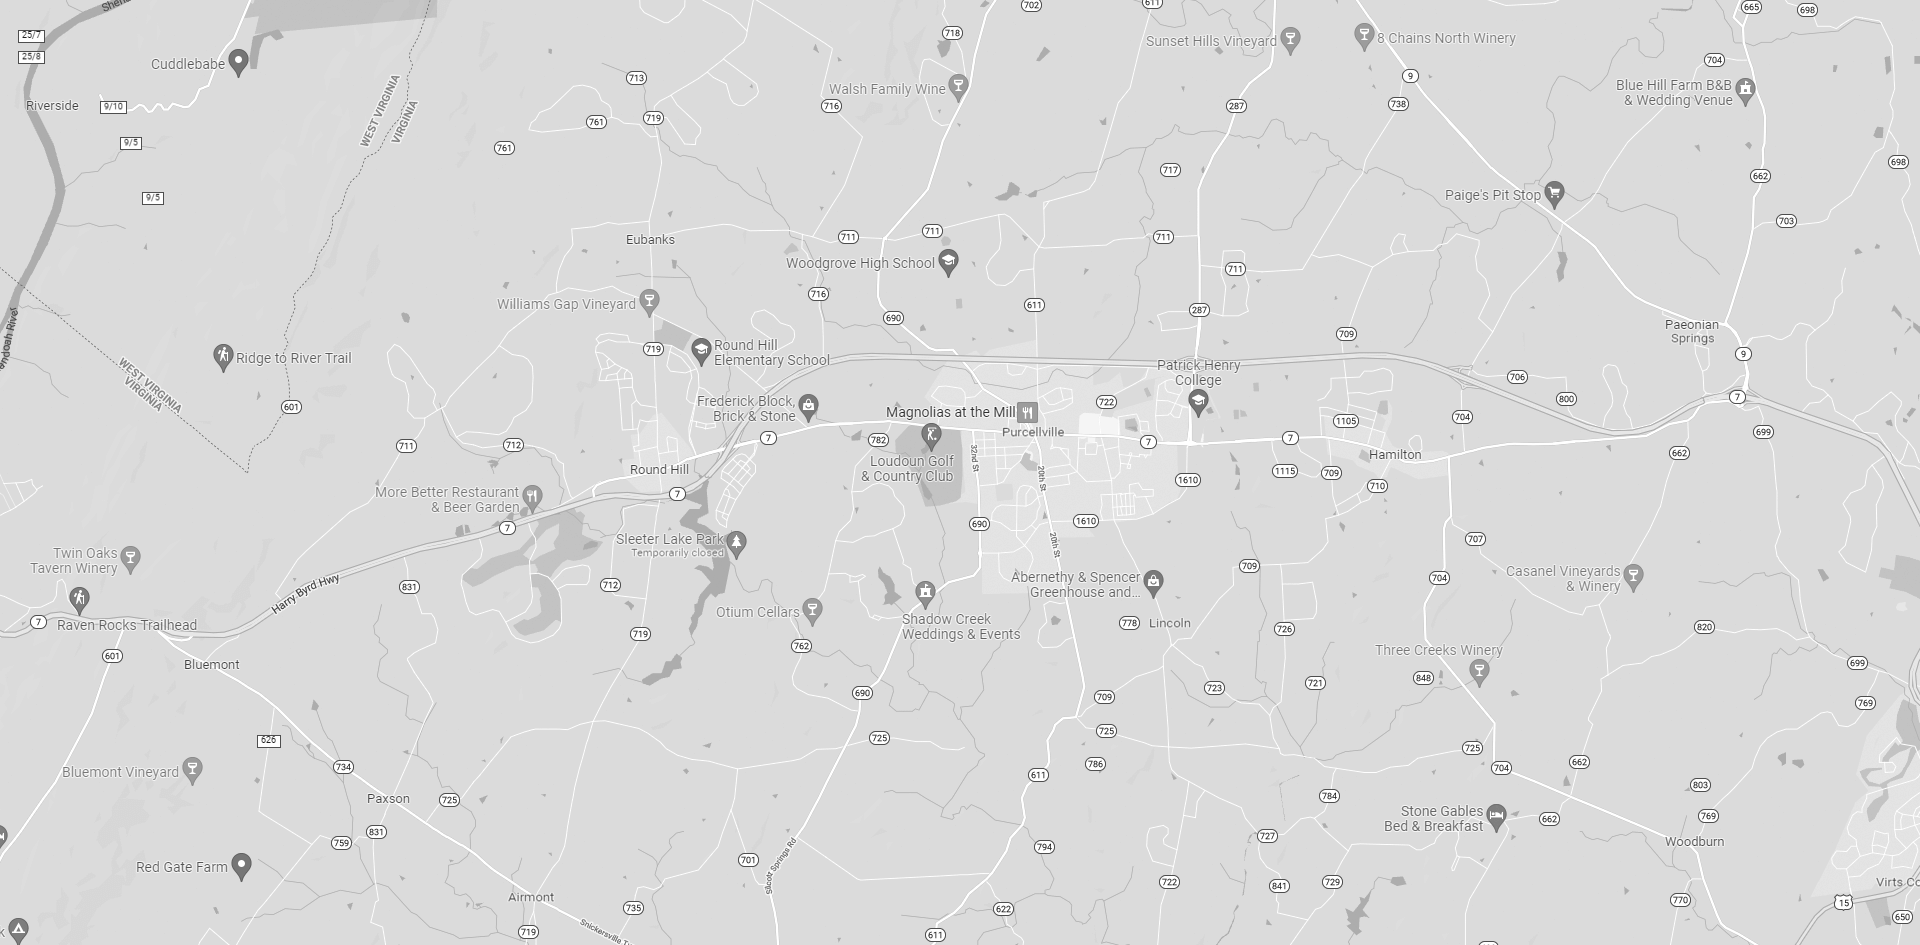 Purcellville, VA area map in black and white.